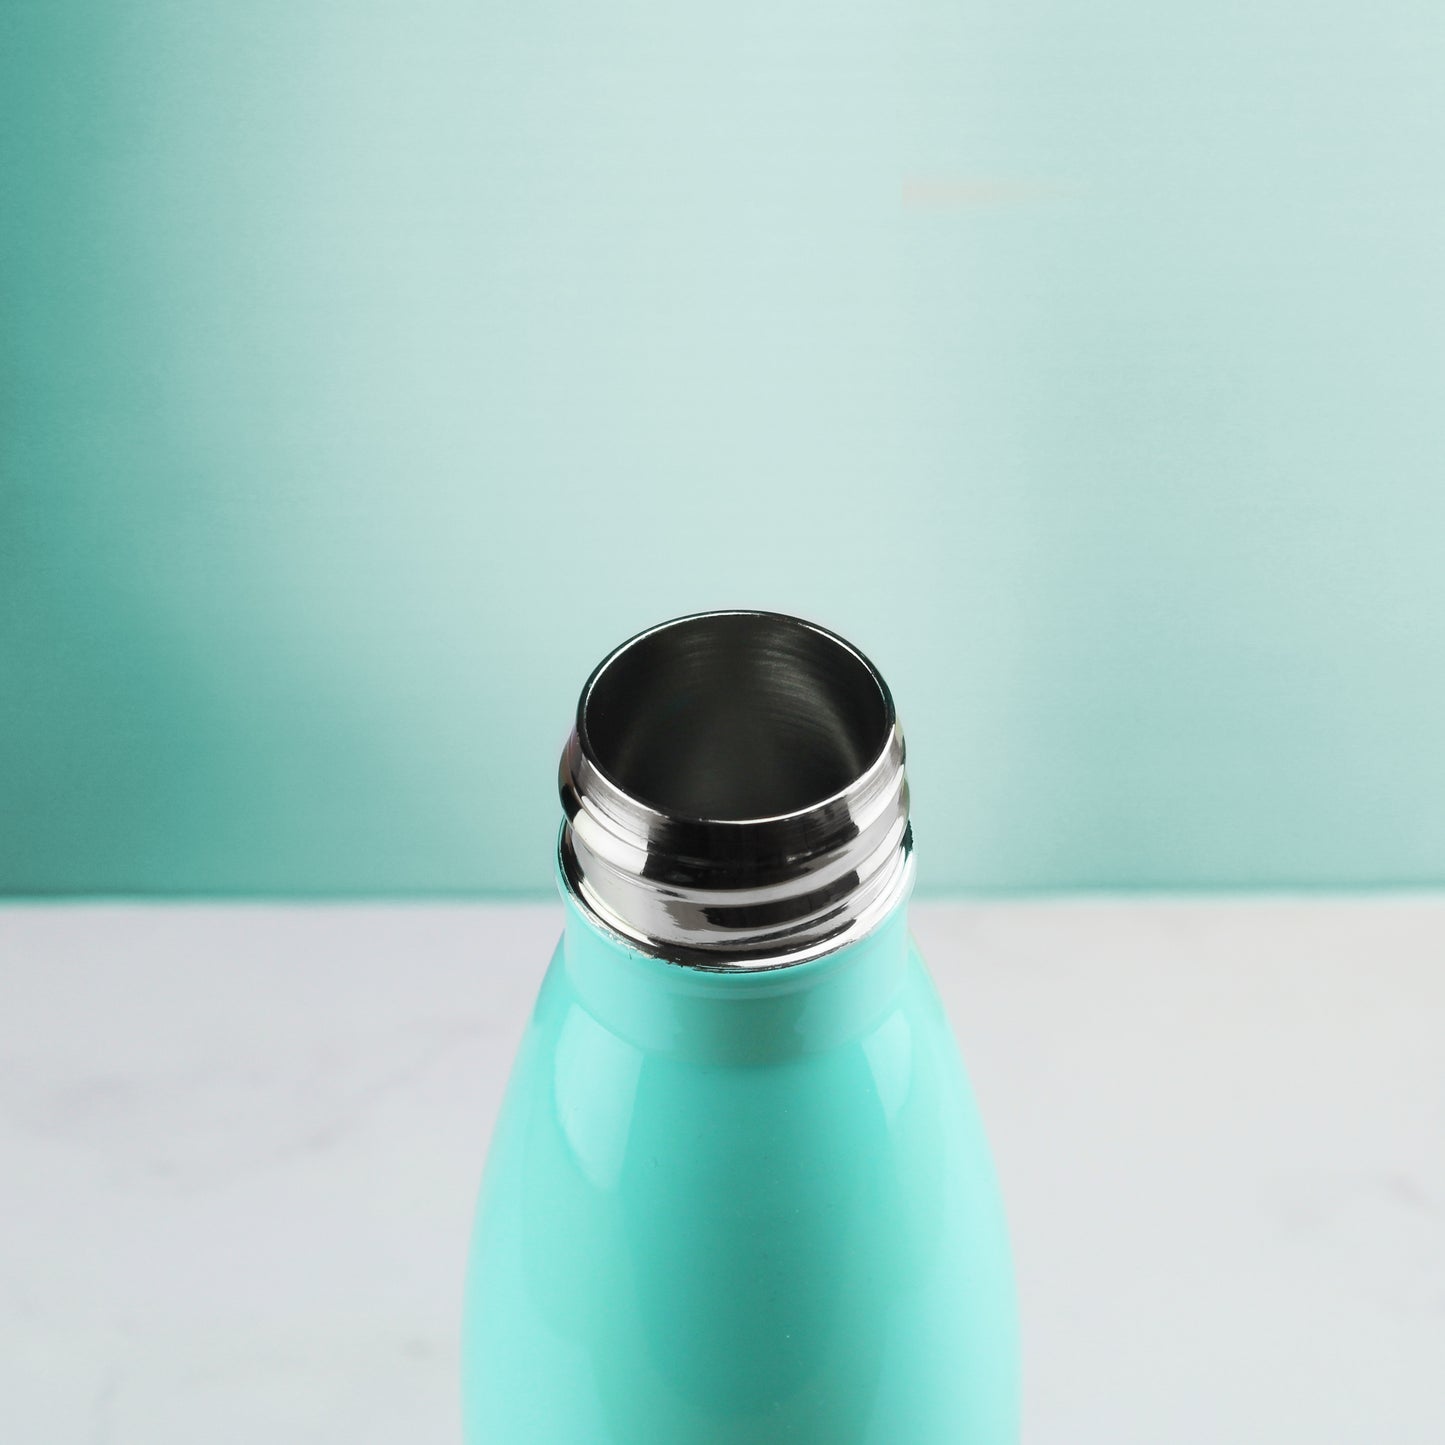 Printed Teal Thermal Bottle, Any Message, Stainless Steel 500ml/17oz Image 4